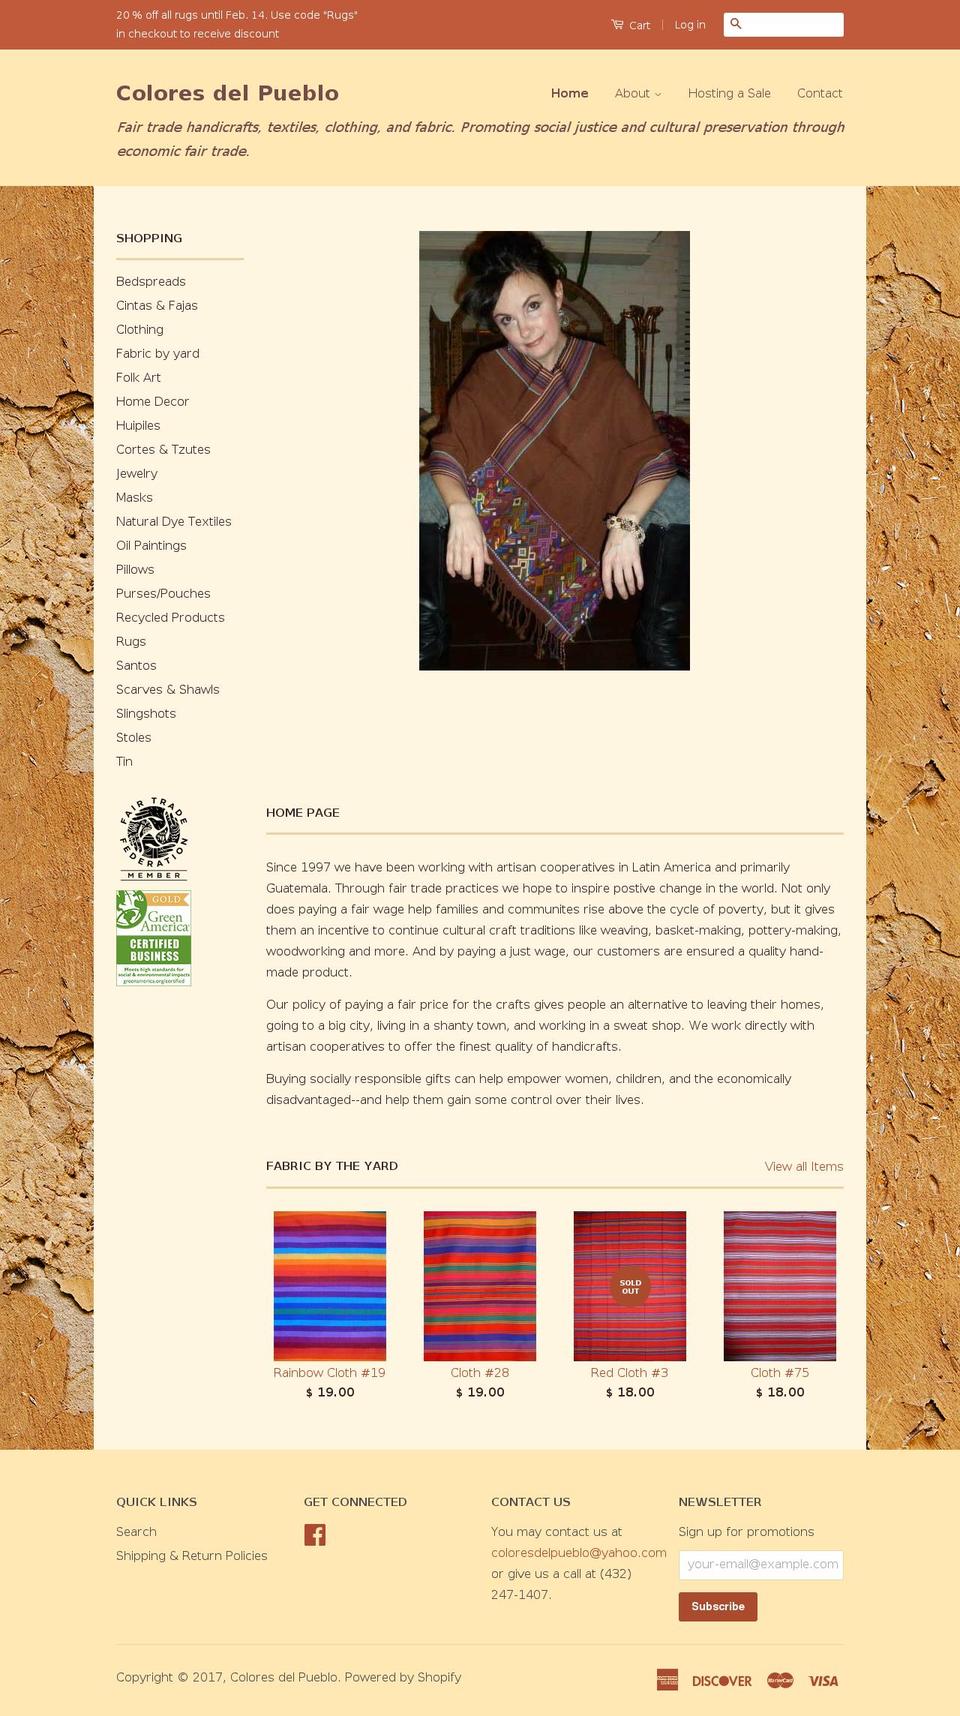 classic Shopify theme site example coloresdelpueblo.org